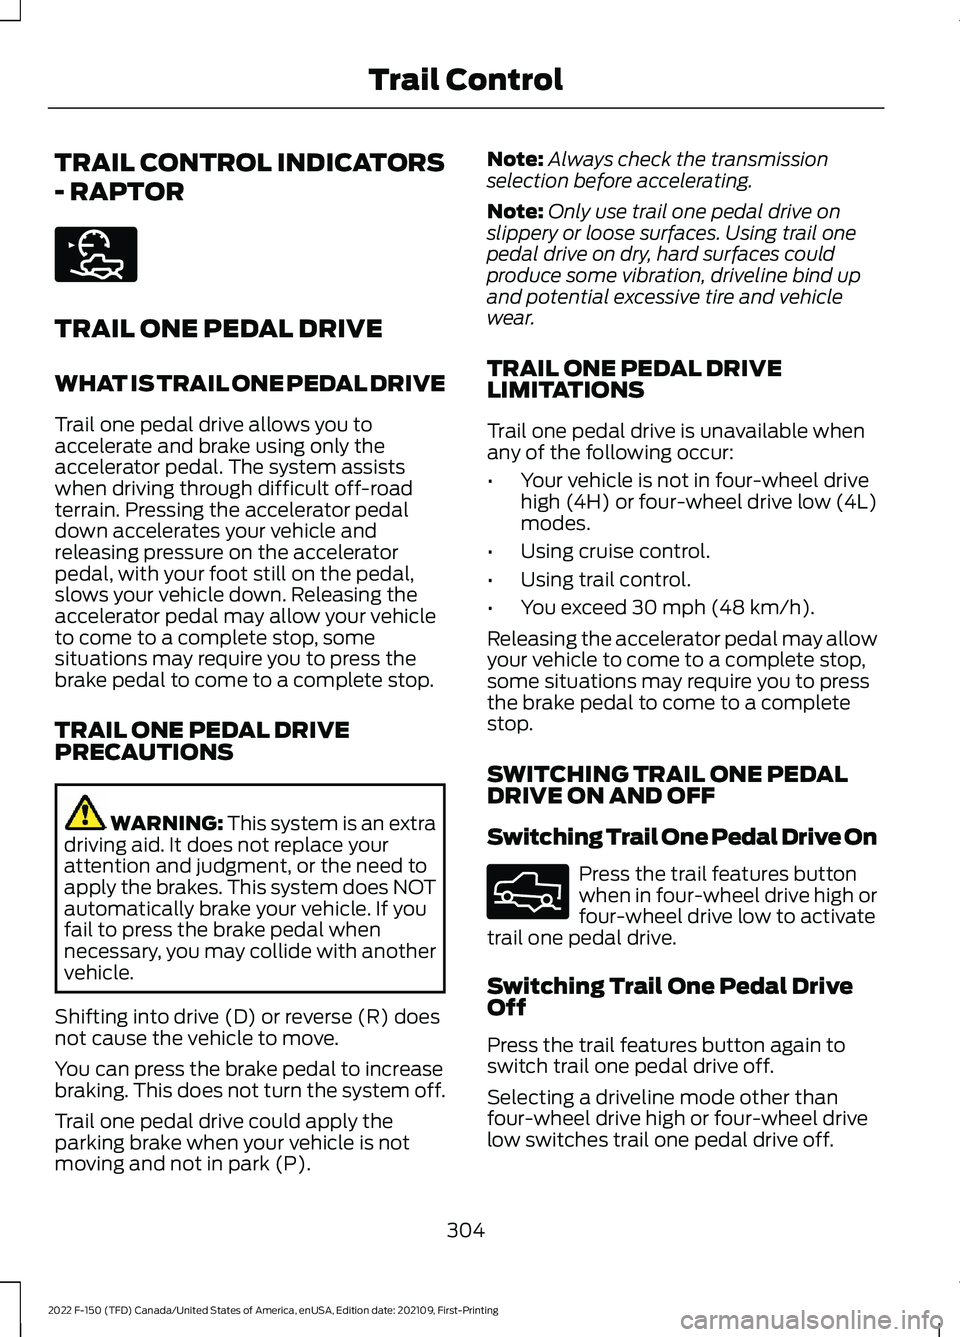 FORD F-150 2022  Owners Manual TRAIL CONTROL INDICATORS
- RAPTOR
TRAIL ONE PEDAL DRIVE
WHAT IS TRAIL ONE PEDAL DRIVE
Trail one pedal drive allows you to
accelerate and brake using only the
accelerator pedal. The system assists
when